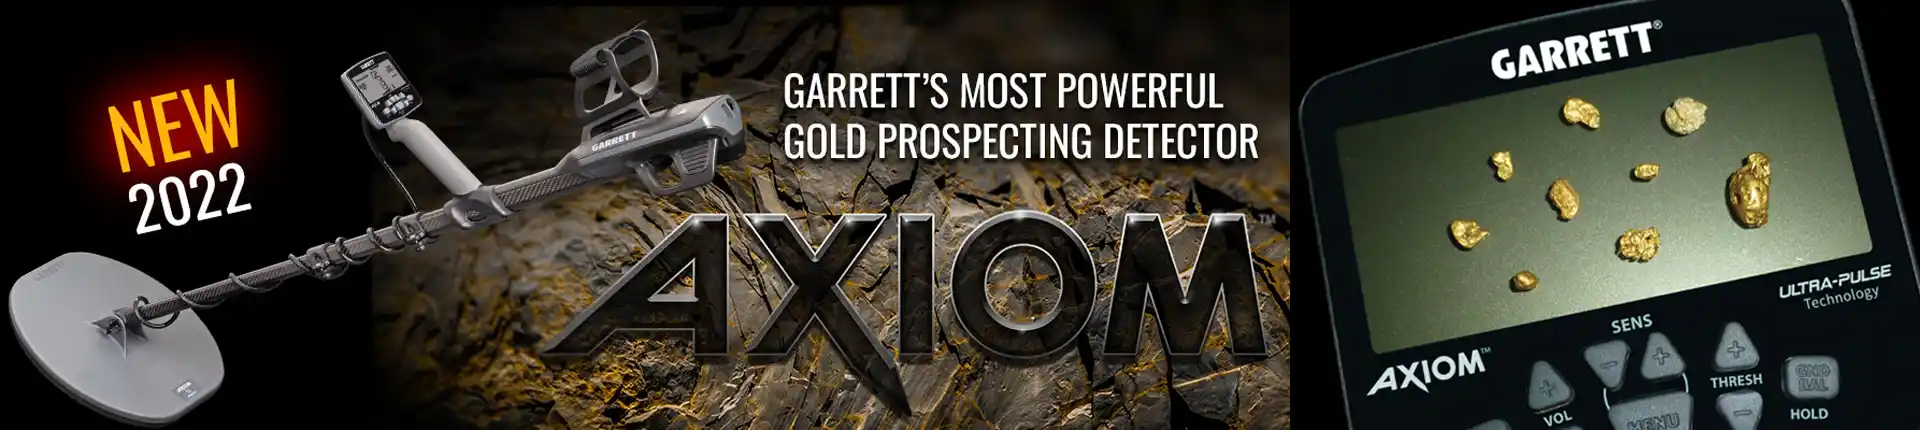 Garrett Axiom Gold Detector For Sale in South Africa, Zimbabwe and Zambia